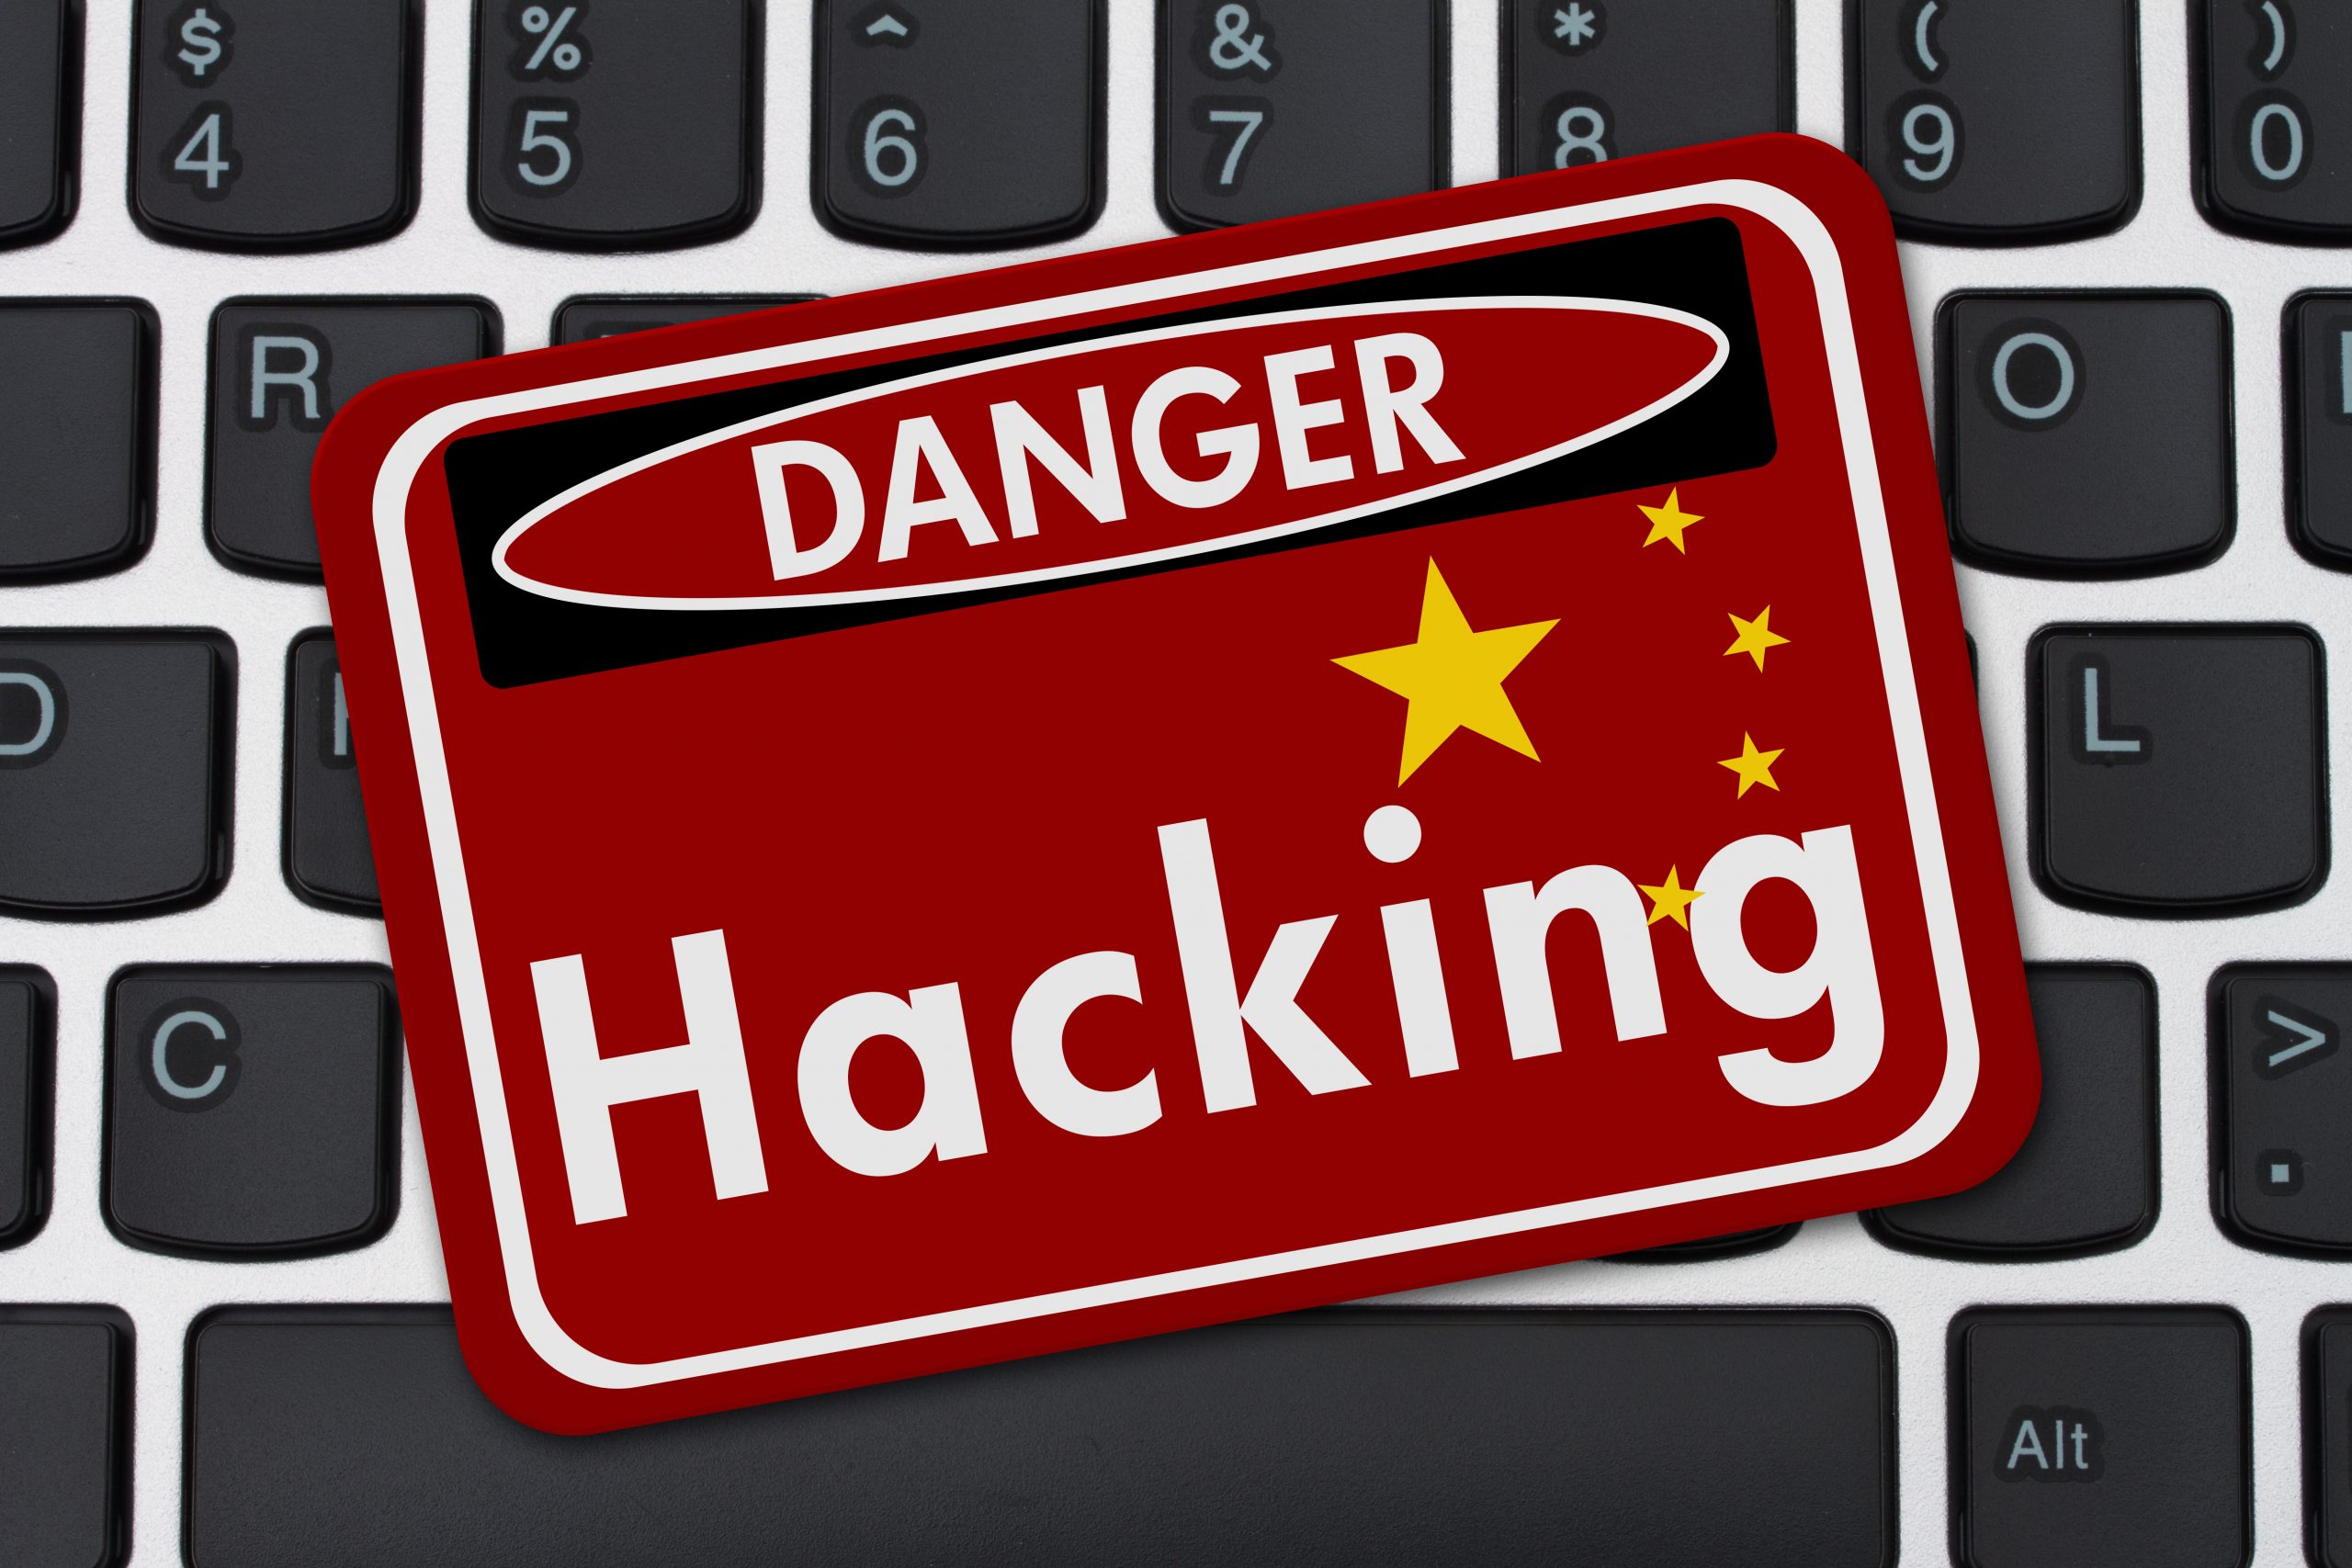 Chinese Hackers - https://depositphotos.com/104431420/stock-photo-chinese-hacking-danger-sign.html